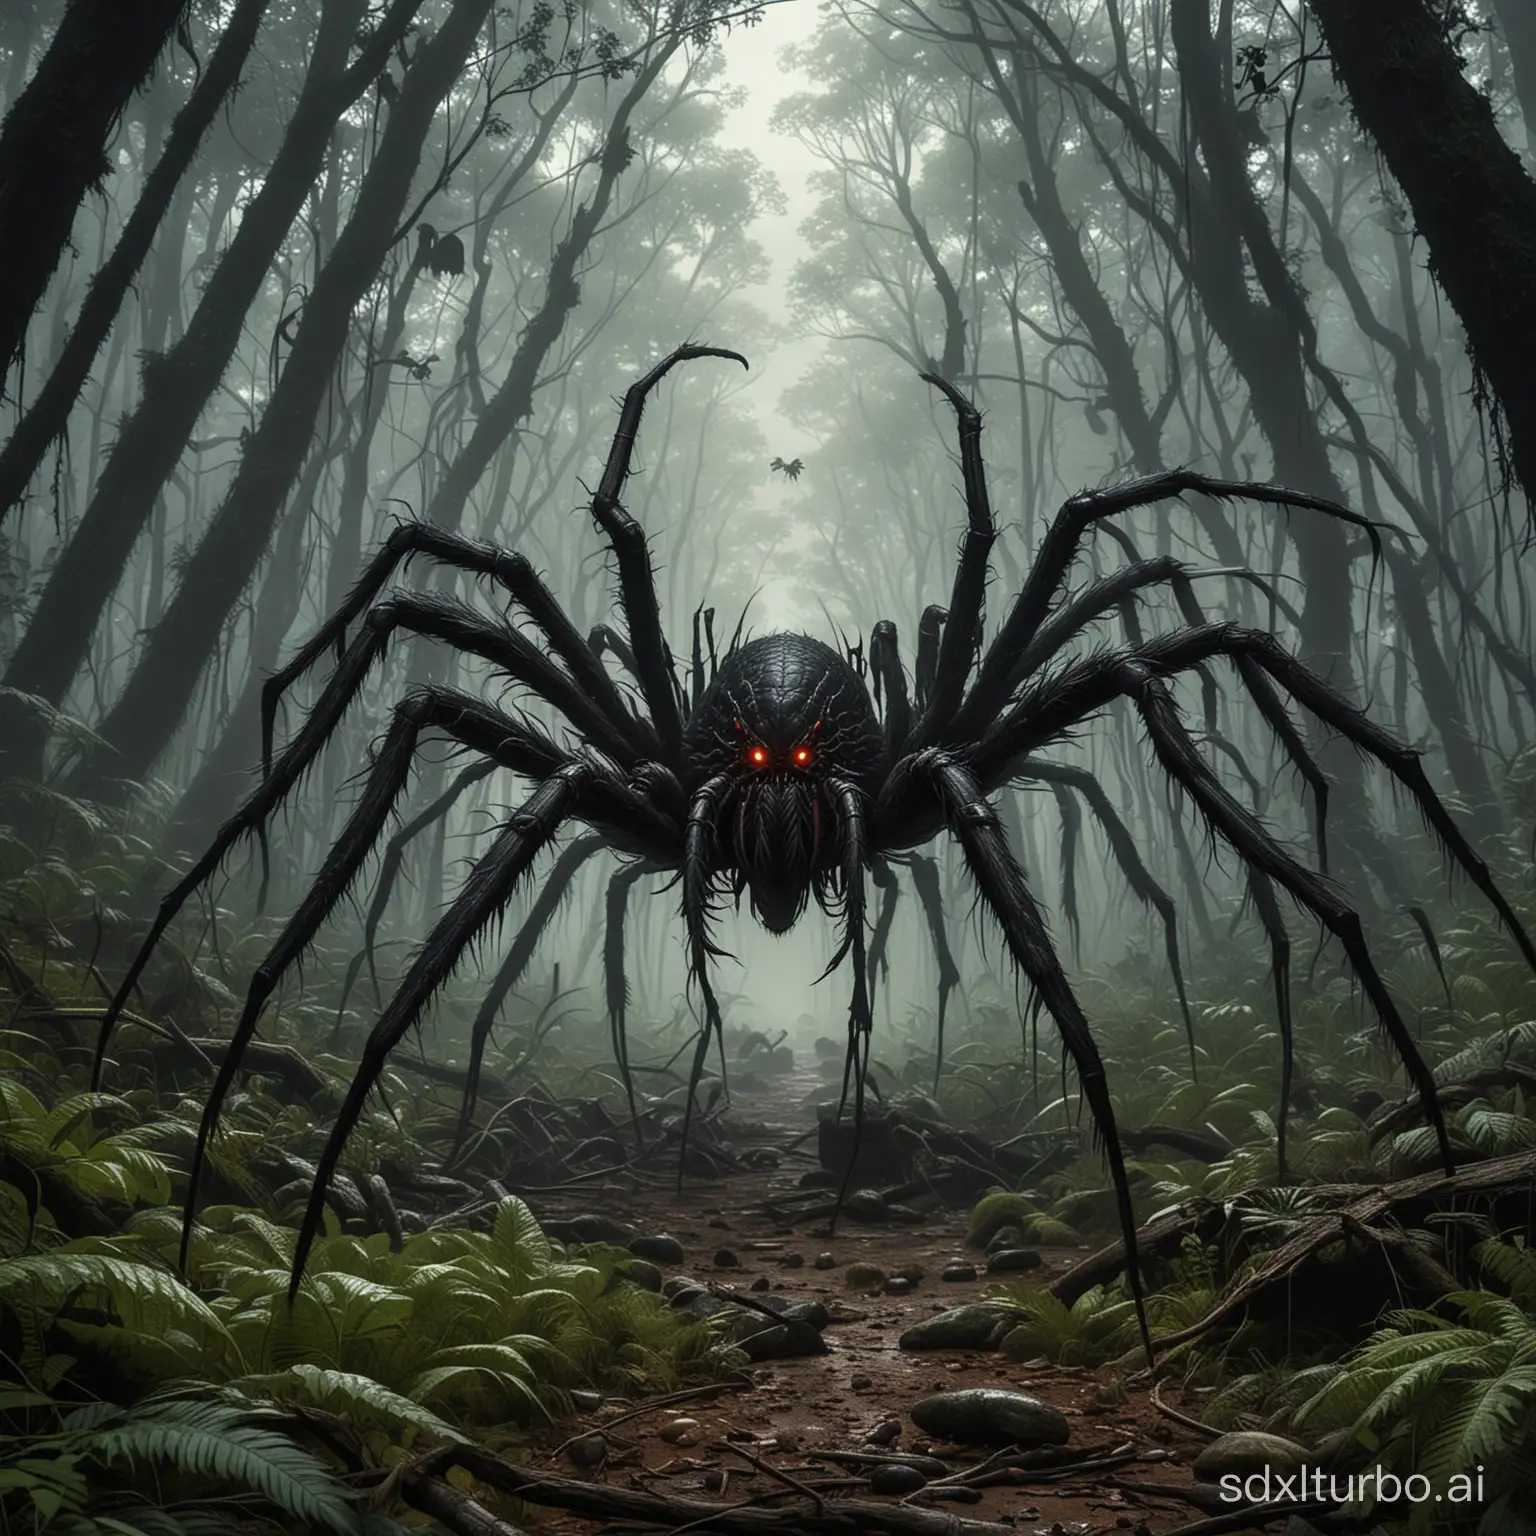 Giant-Spiders-Invading-a-Dense-Forest-at-Night